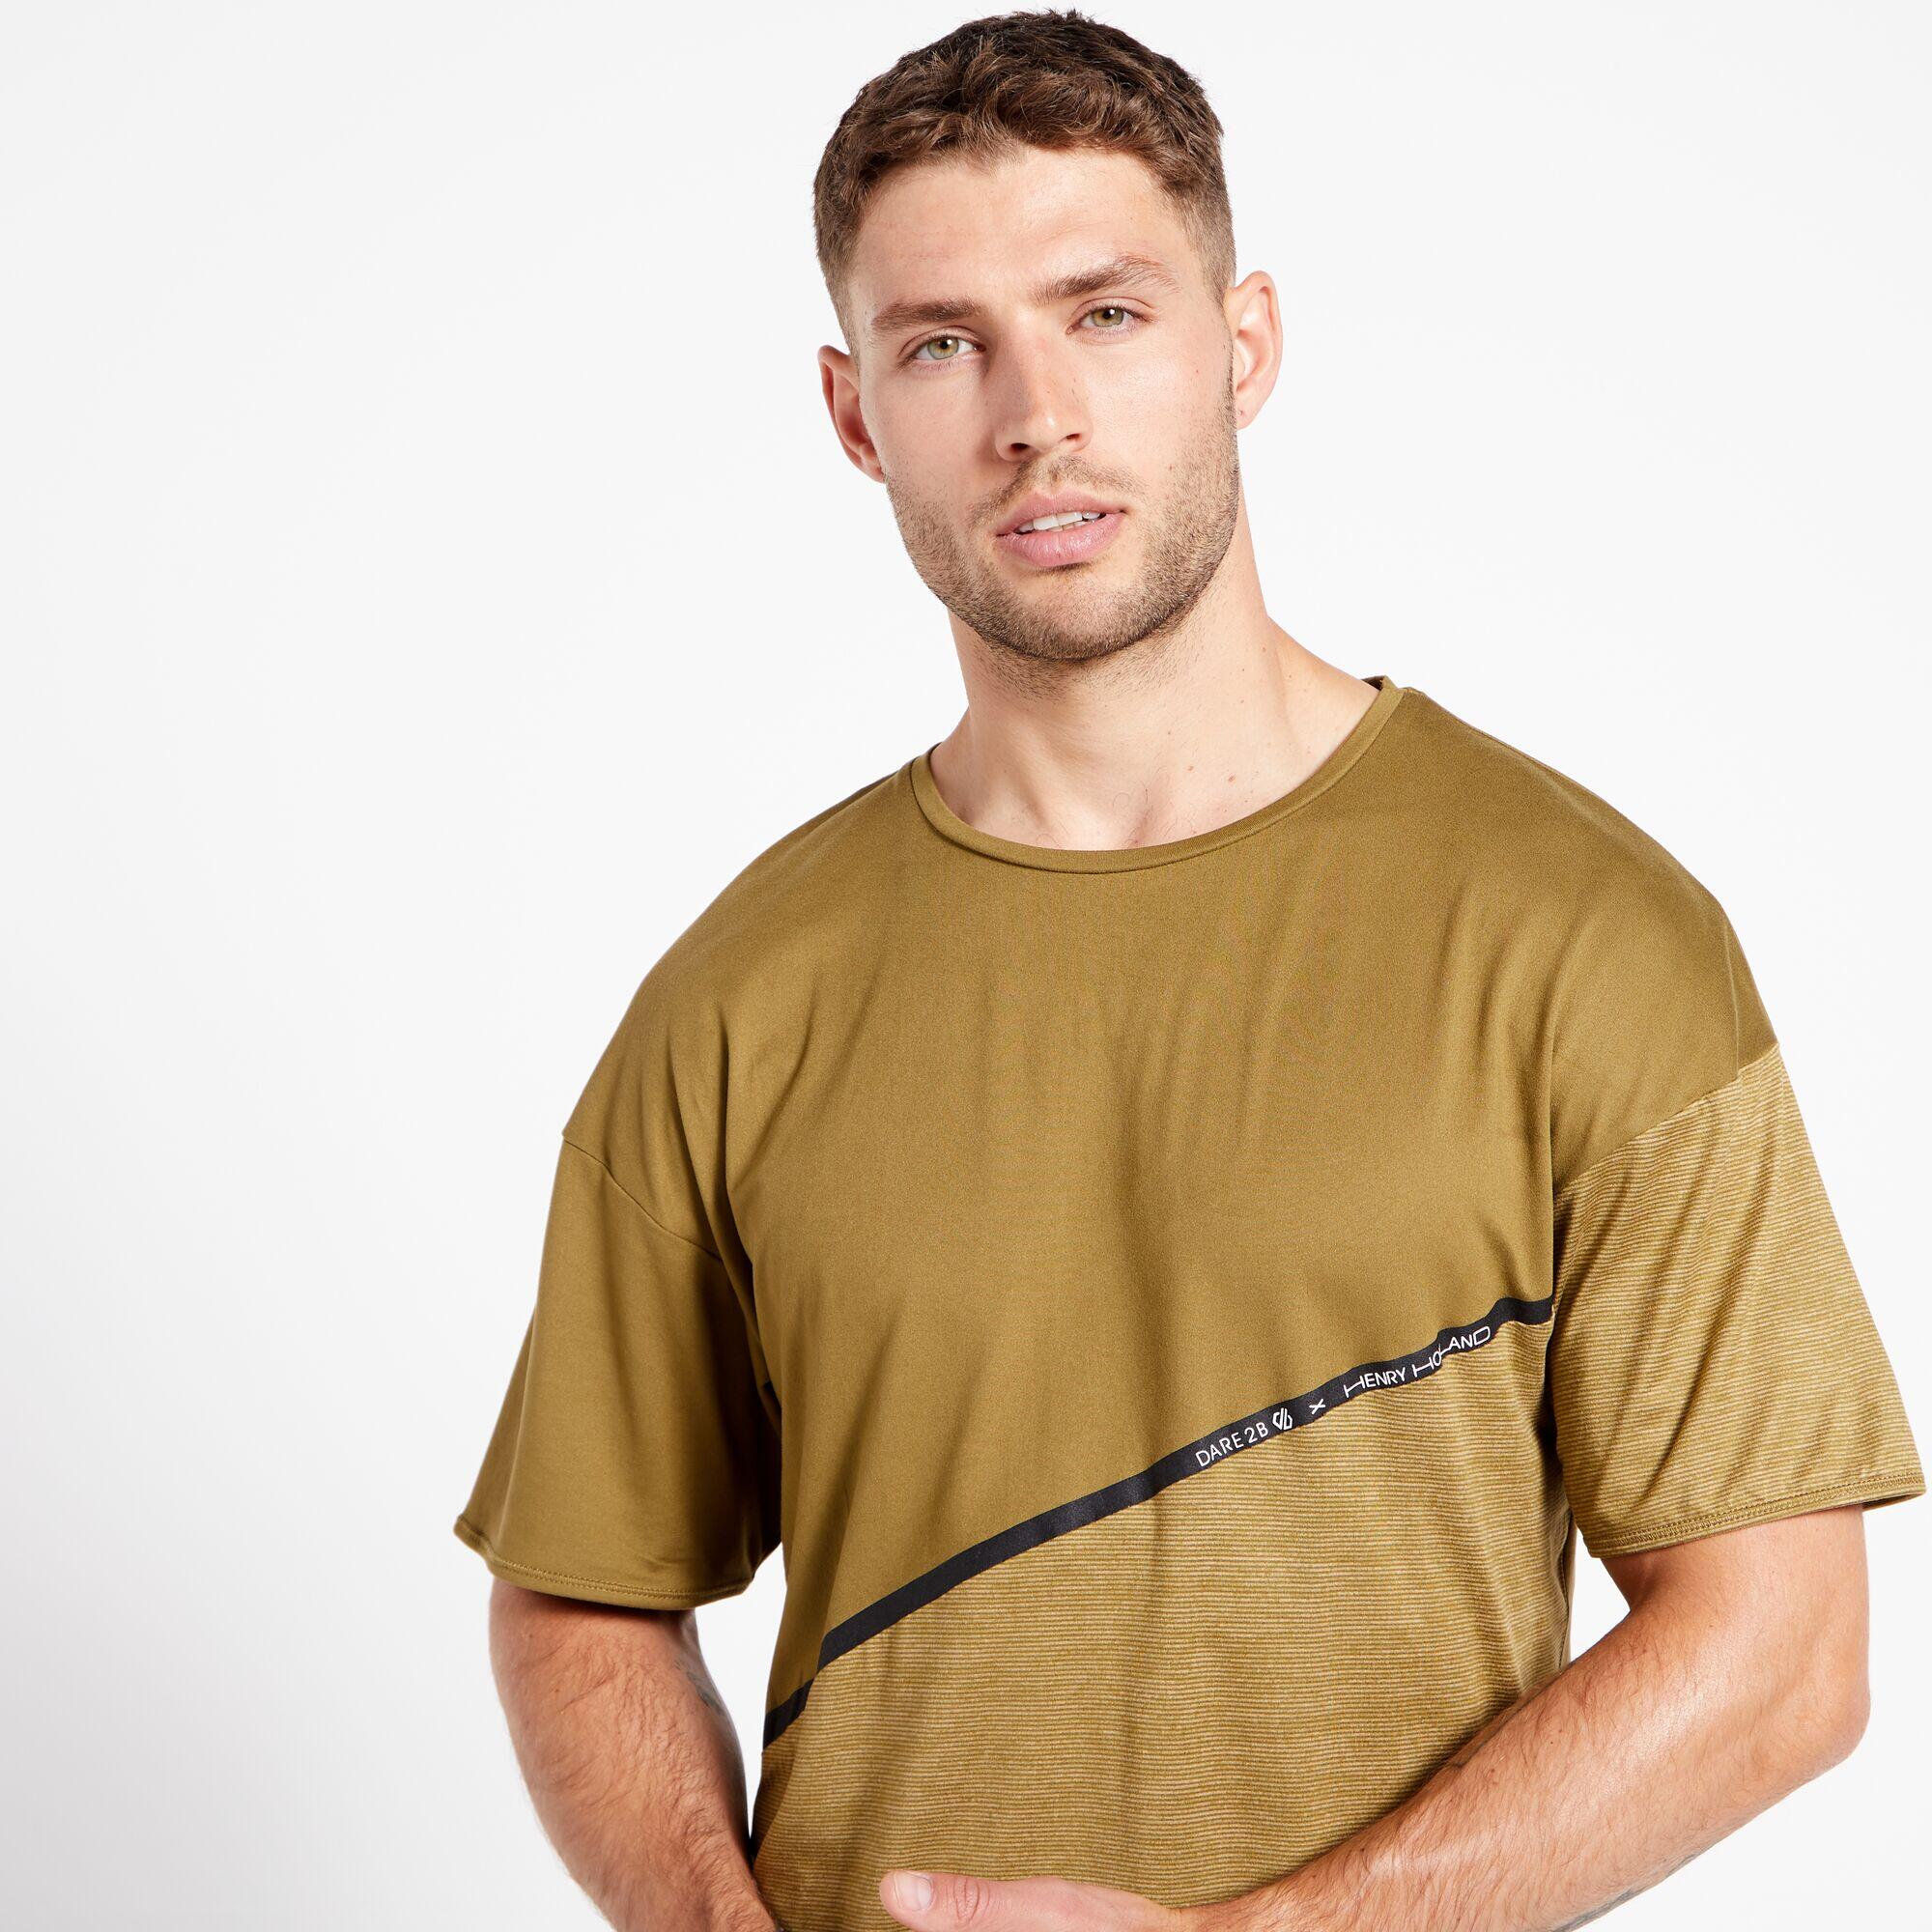 Henry Holland No Sweat Mens Gym Active T-Shirt - Olive Green 4/4